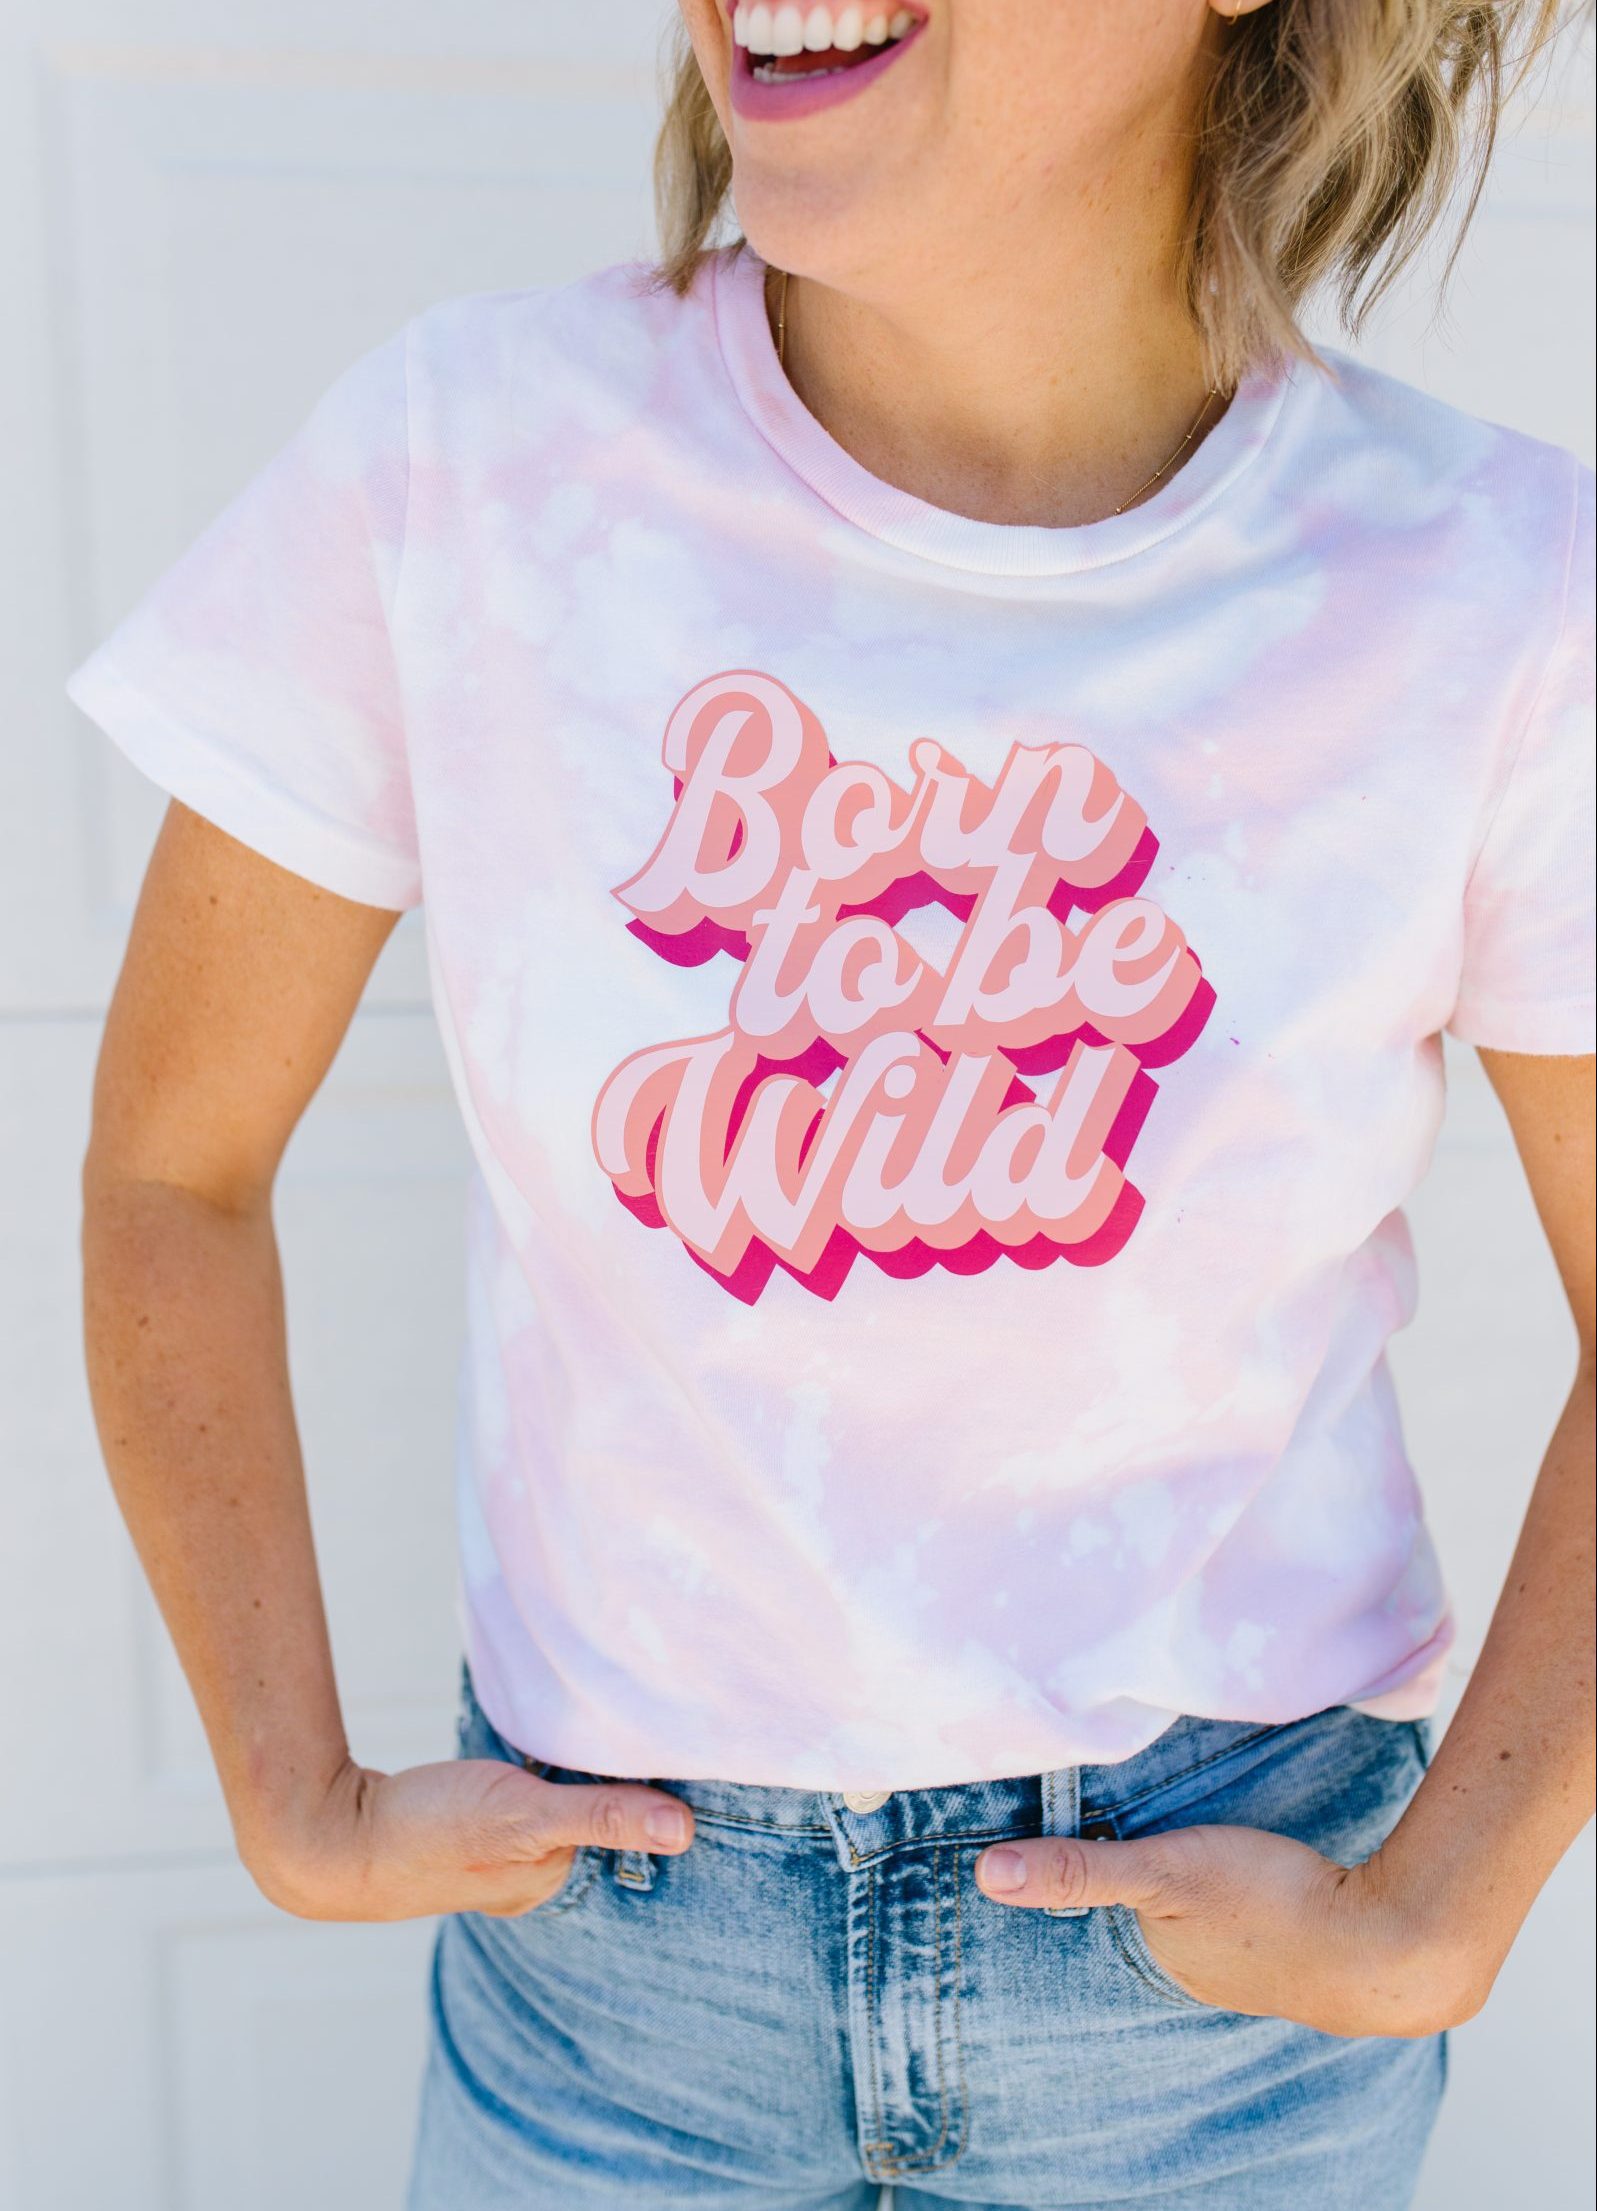 How to Layer Heat Transfer Vinyl on a Graphic Tee + a tutorial featured by Top US Craft Blog + The Pretty Life Girls